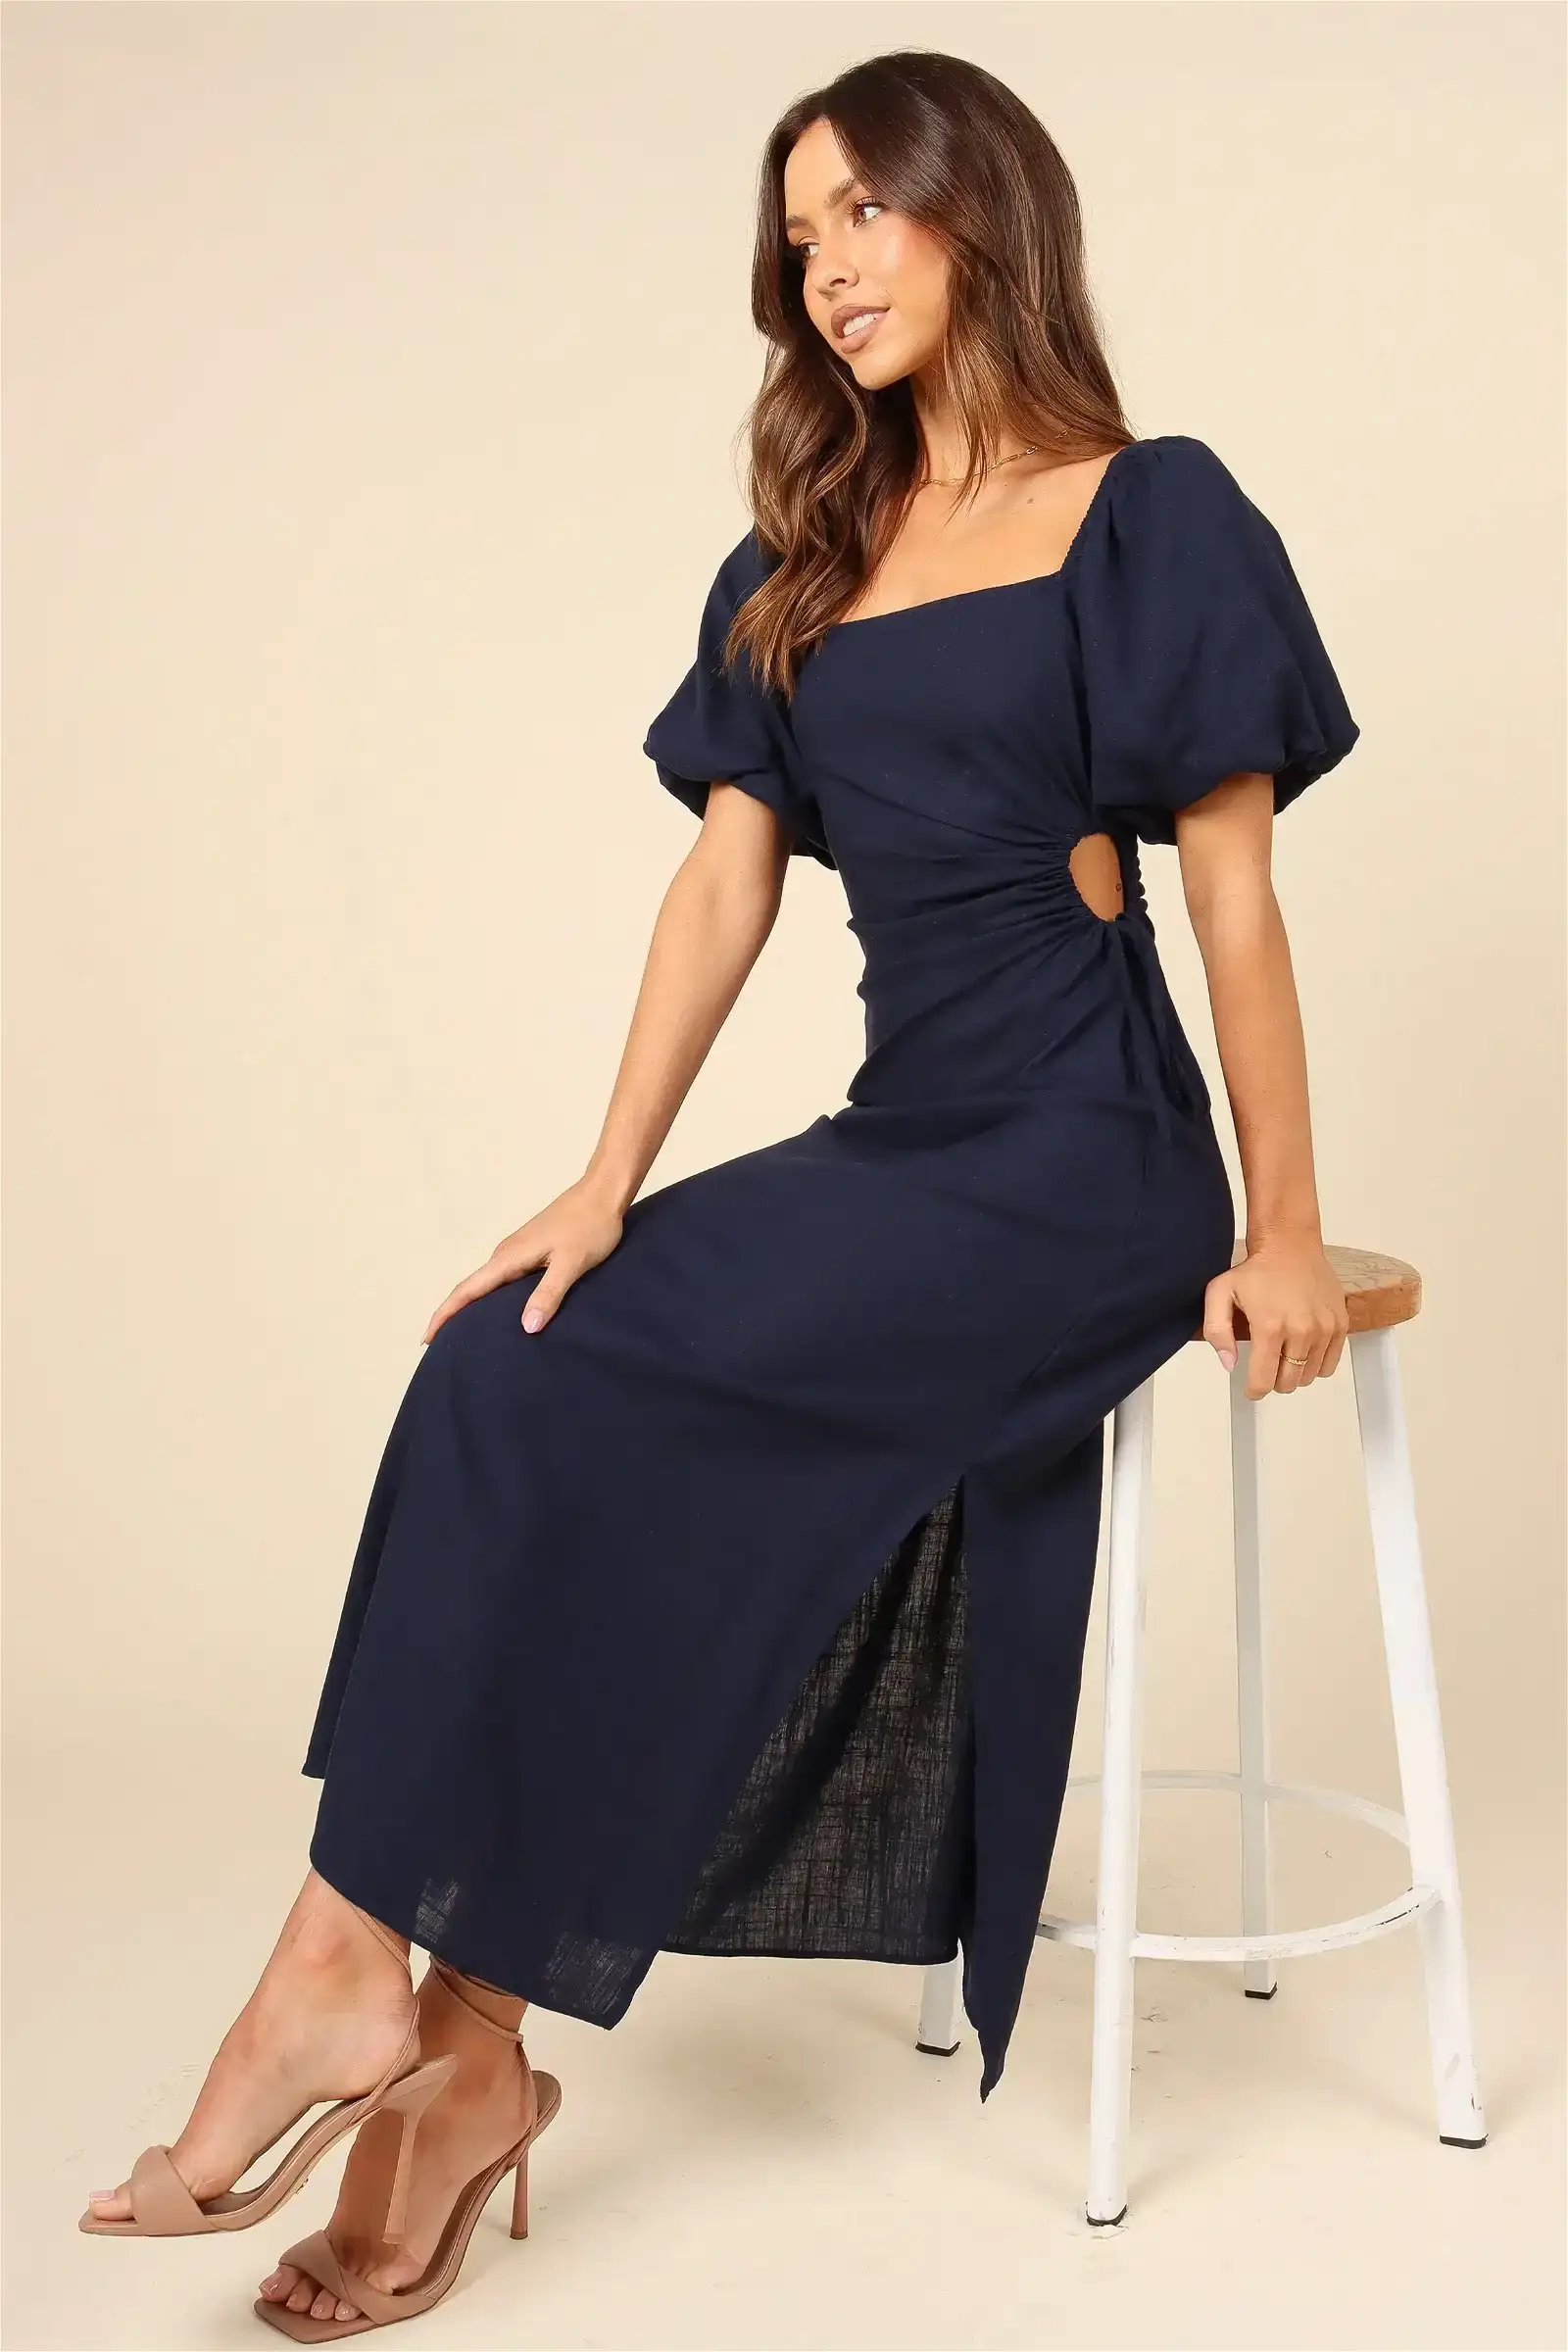 Image of Chloe Cut Out Dress - Navy